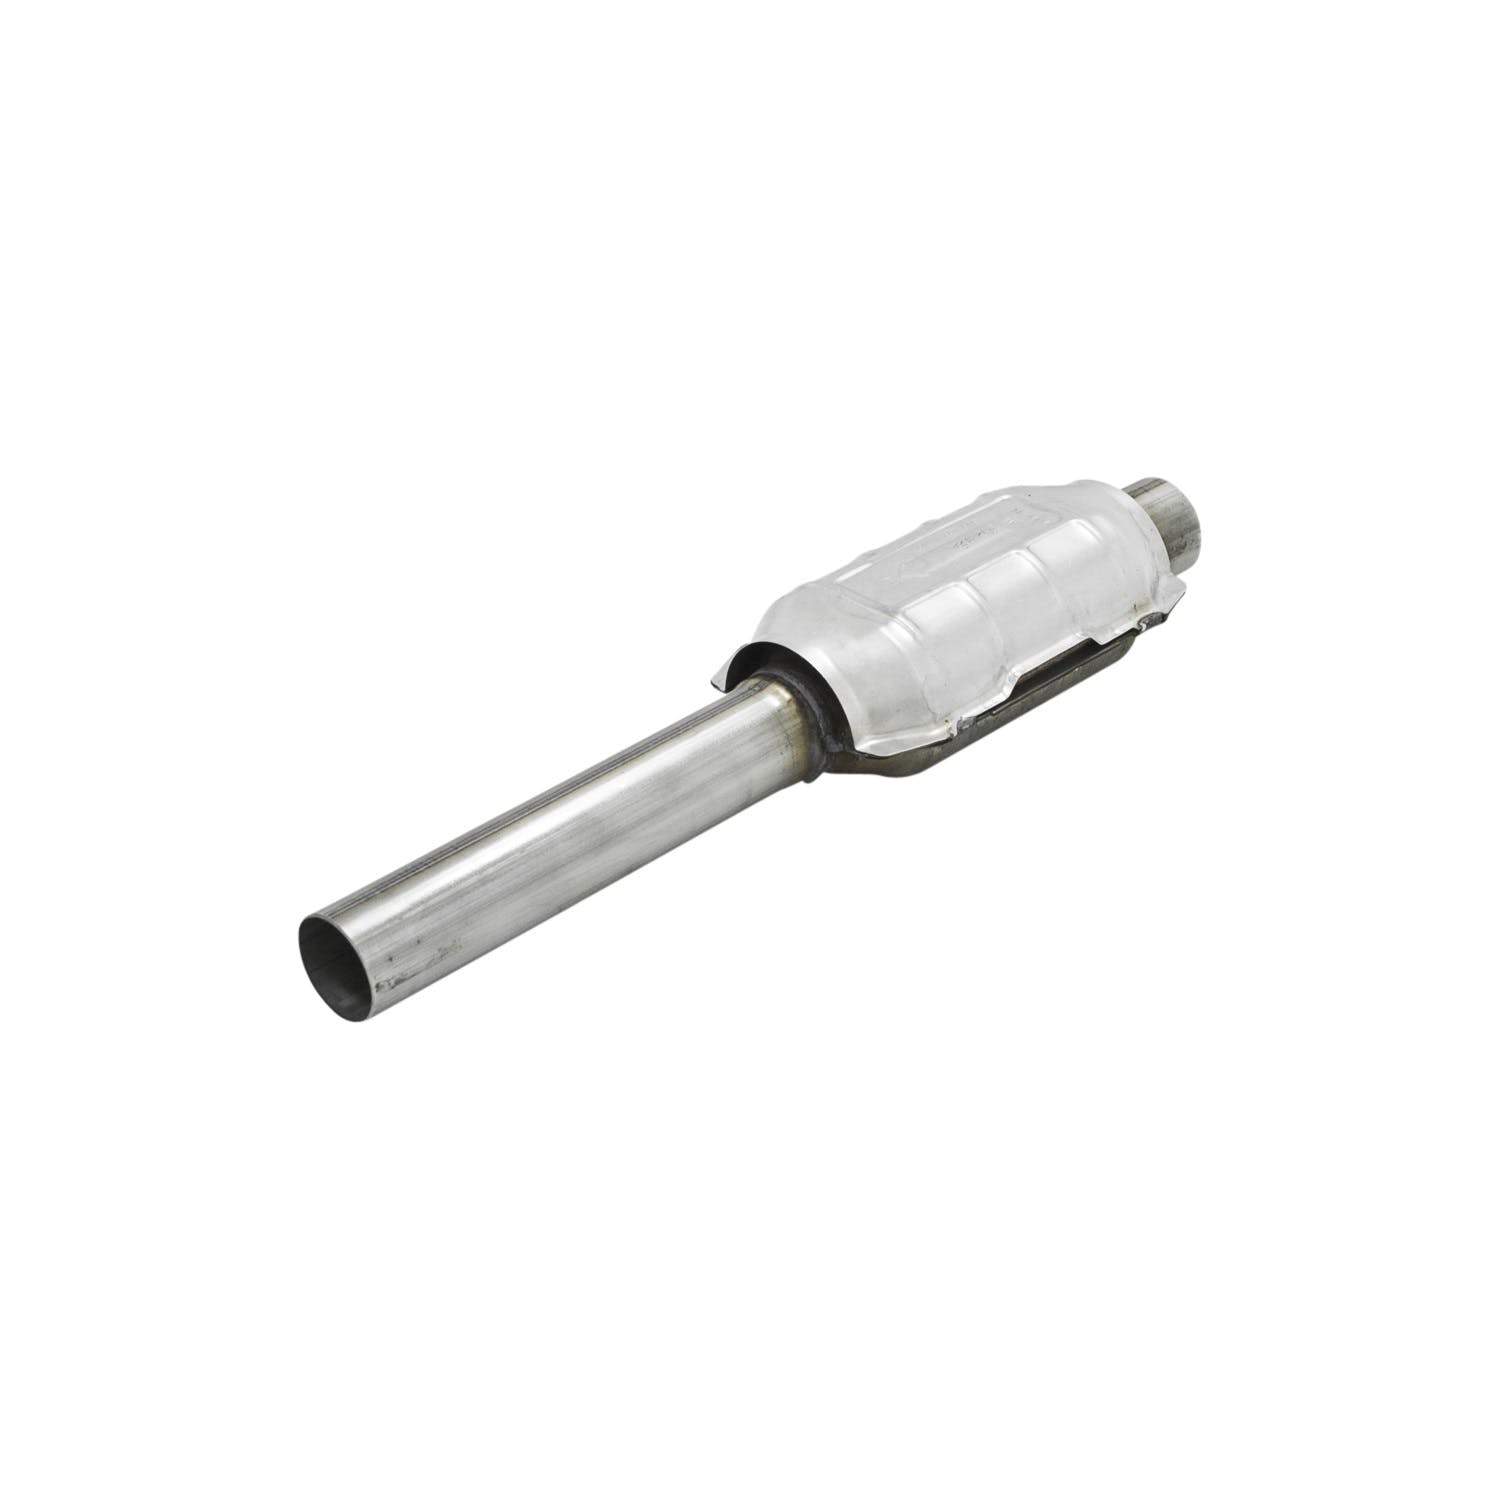 Flowmaster Catalytic Converters 2040001 Catalytic Converter-Direct Fit-2.25 in. Inlet/Outlet-49 State